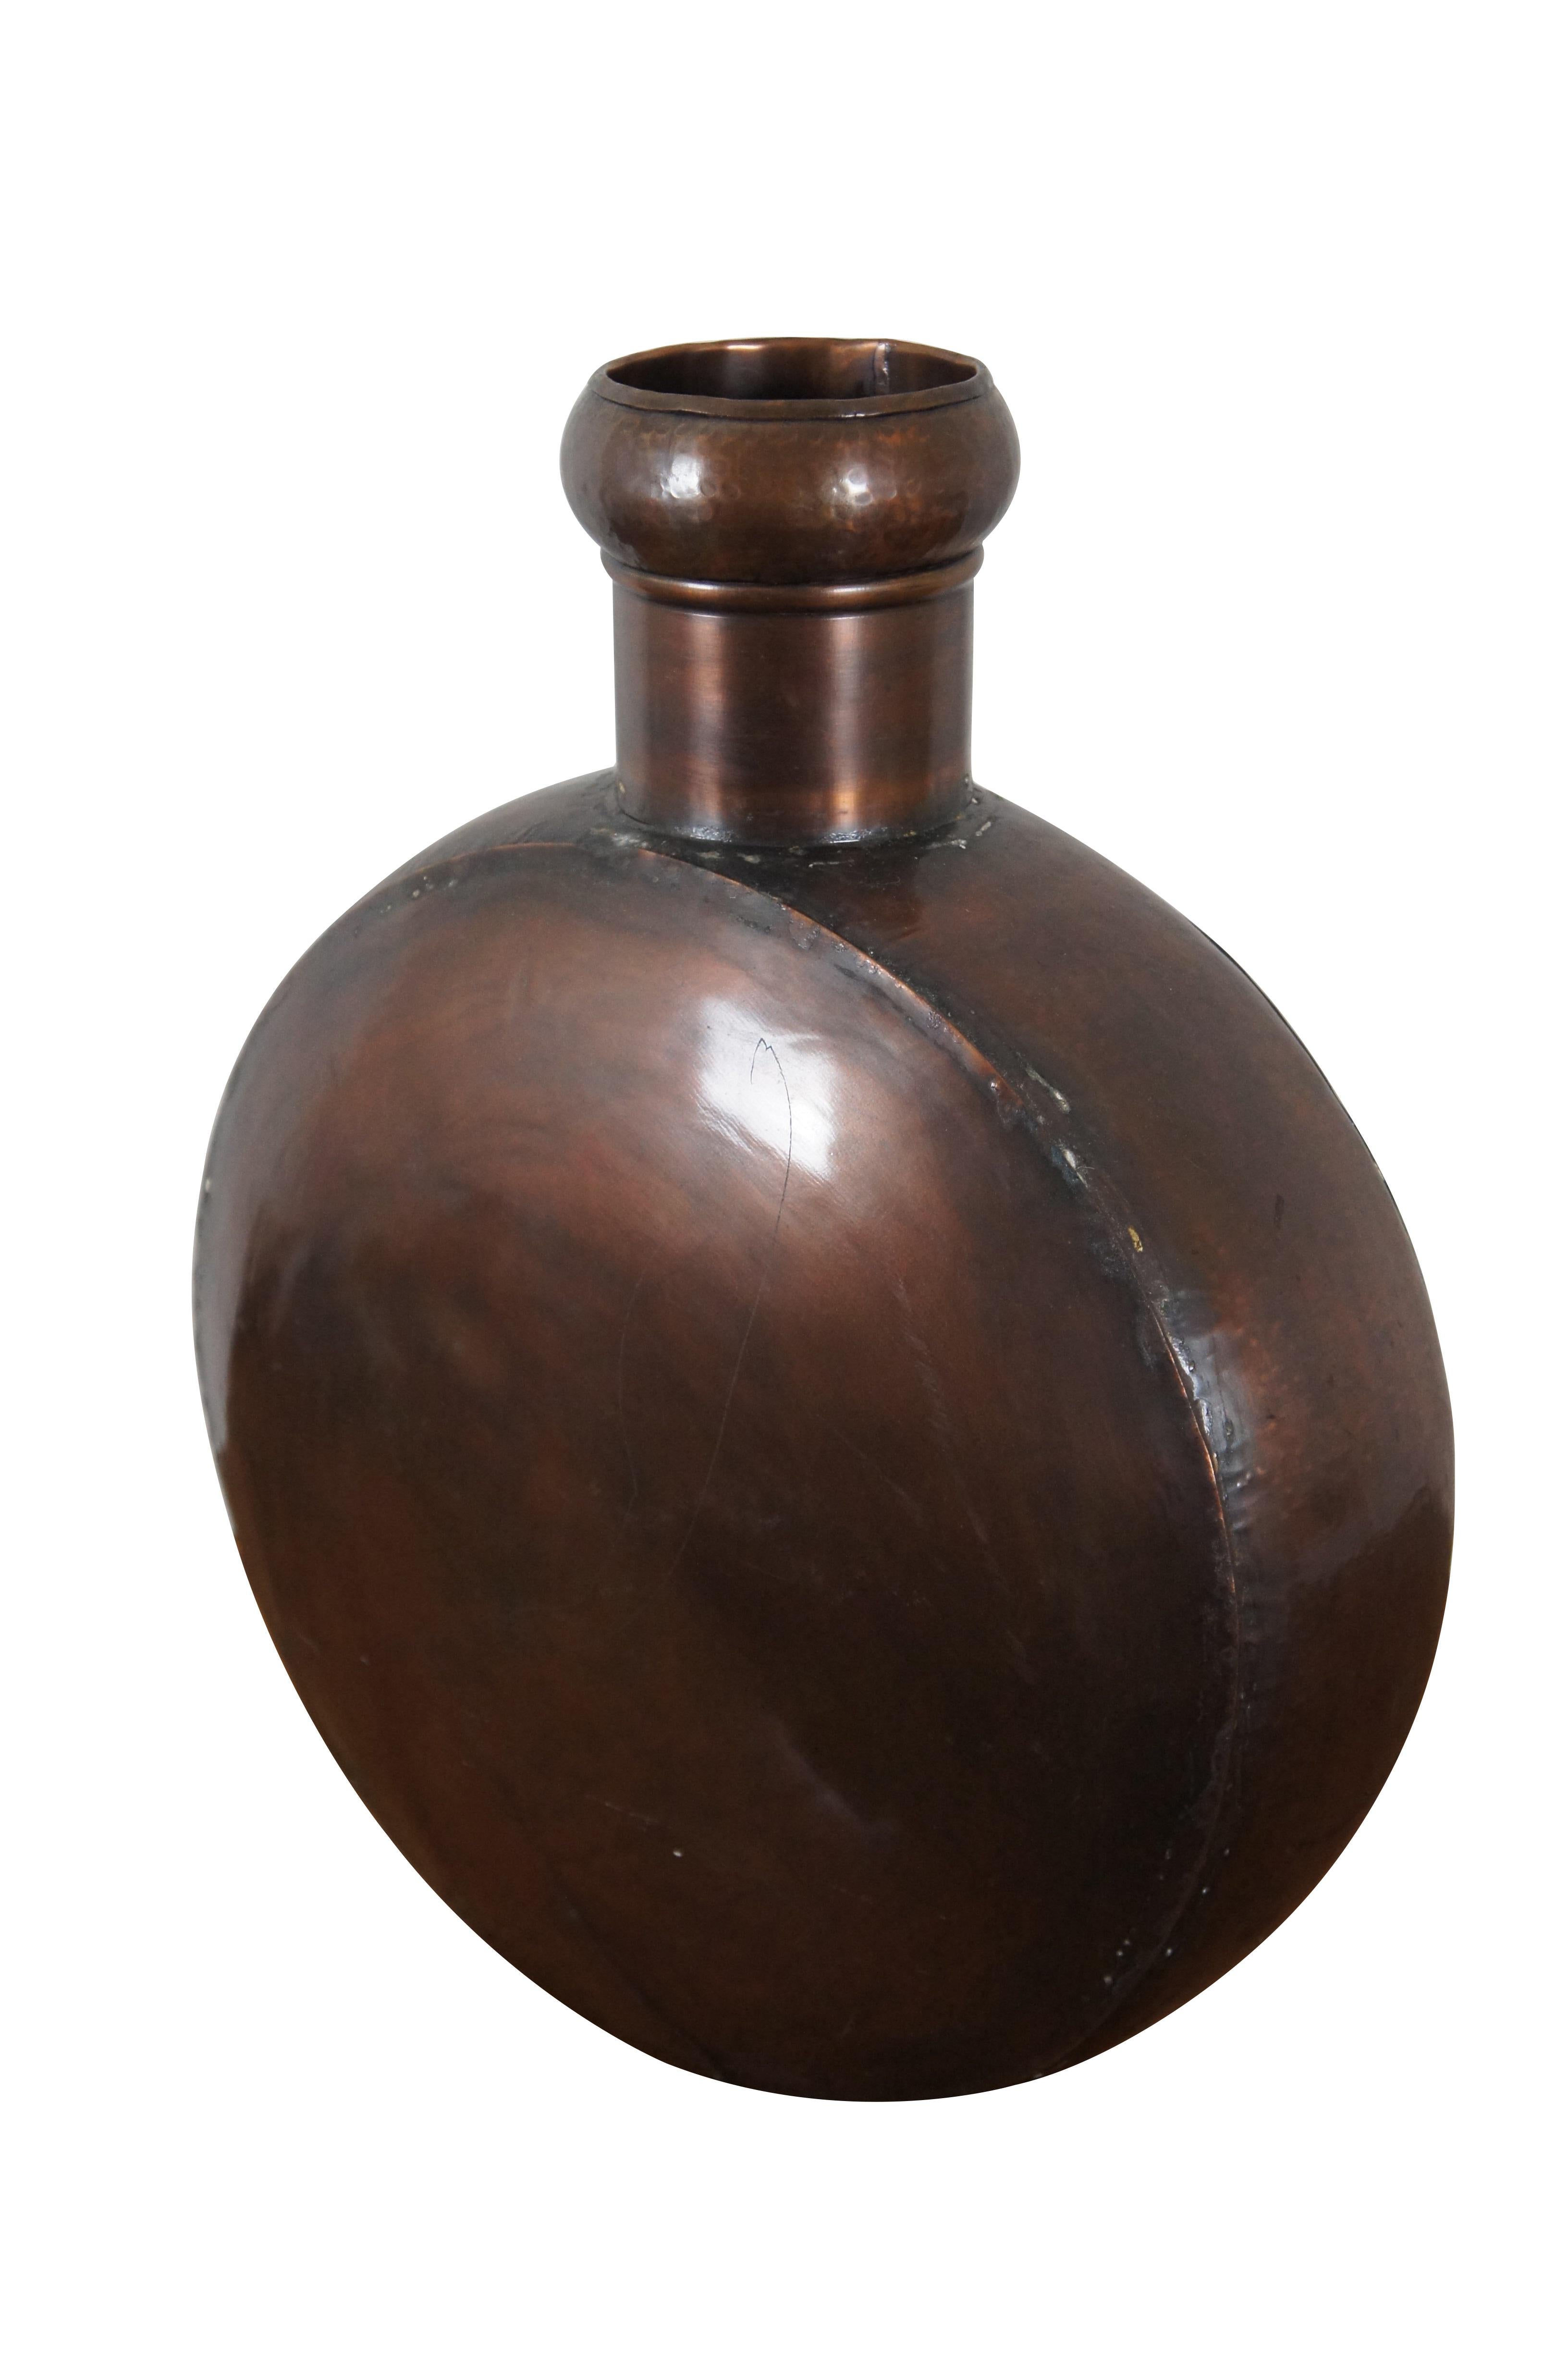 Vintage large scale copper flask / canteen with a round body and hammered rim. No stopper. No makers mark.

Dimensions:
16” x 7” x 21” (Width x Depth x Height)